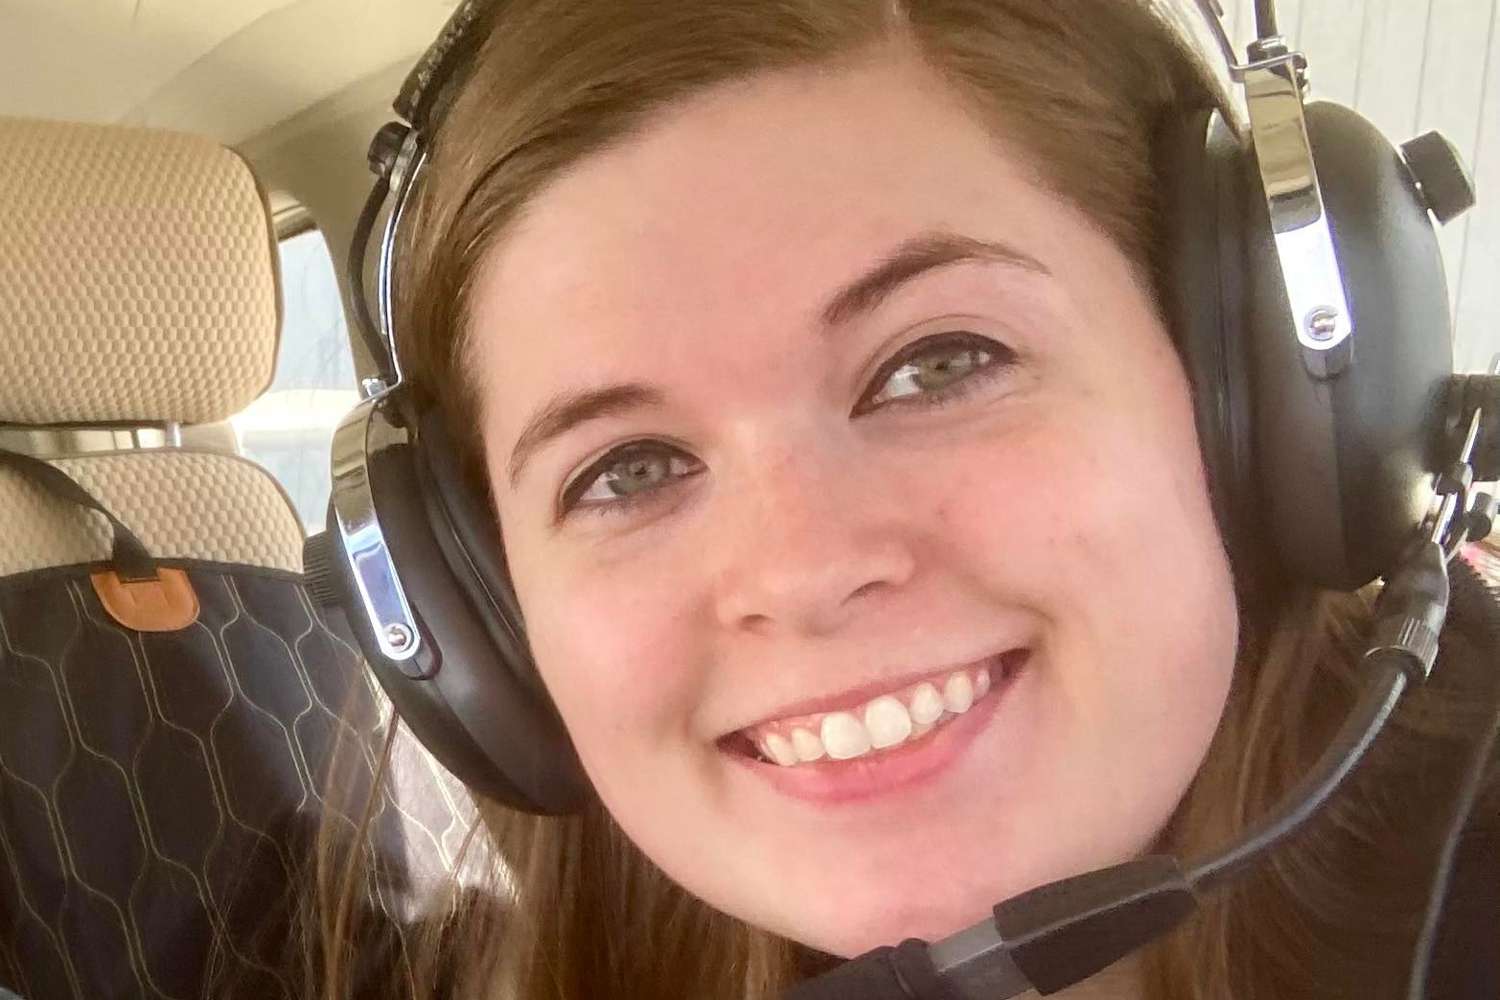 Pilot, 26, Dies in Crash Moments After Skydivers Jumped from Plane: ‘She Was Doing What She Loved’